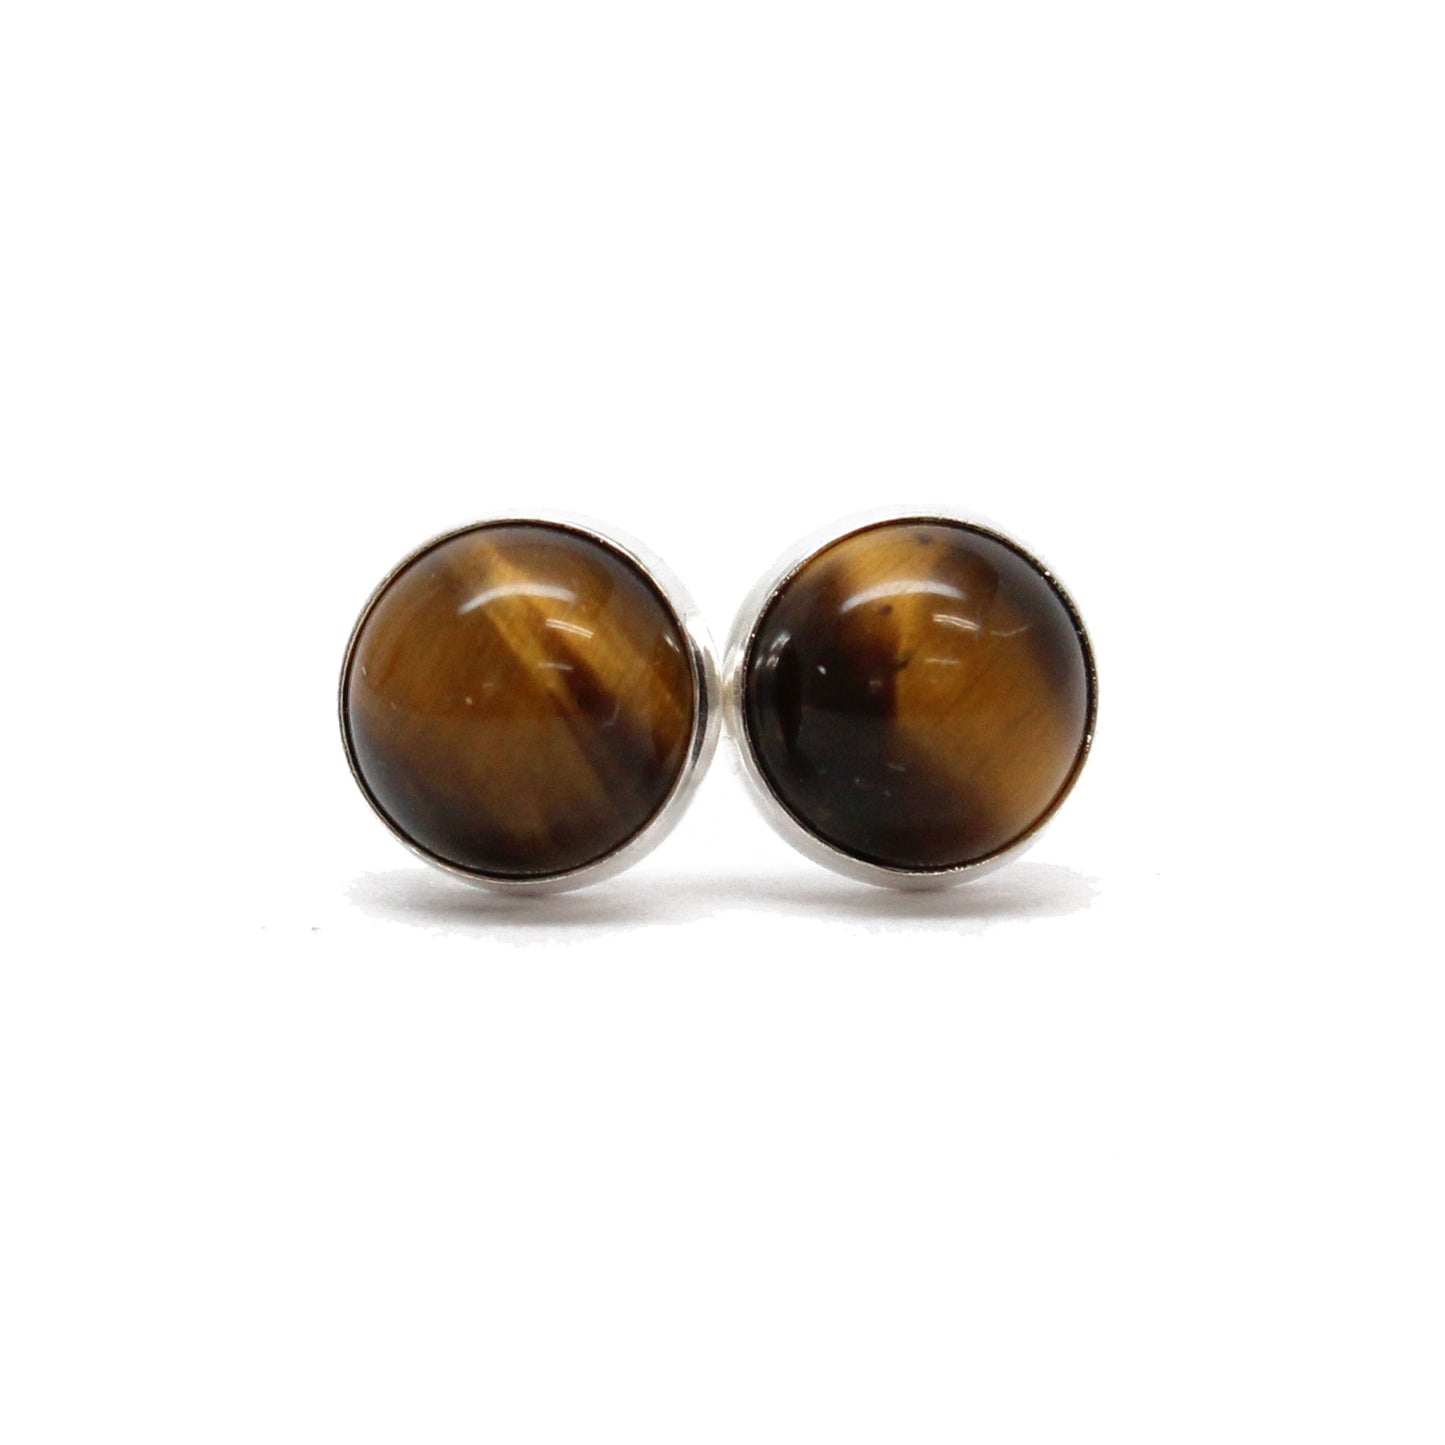 Load image into Gallery viewer, Tigers Eye Stud Earrings in Sterling Silver or Gold Fill, 6mm
